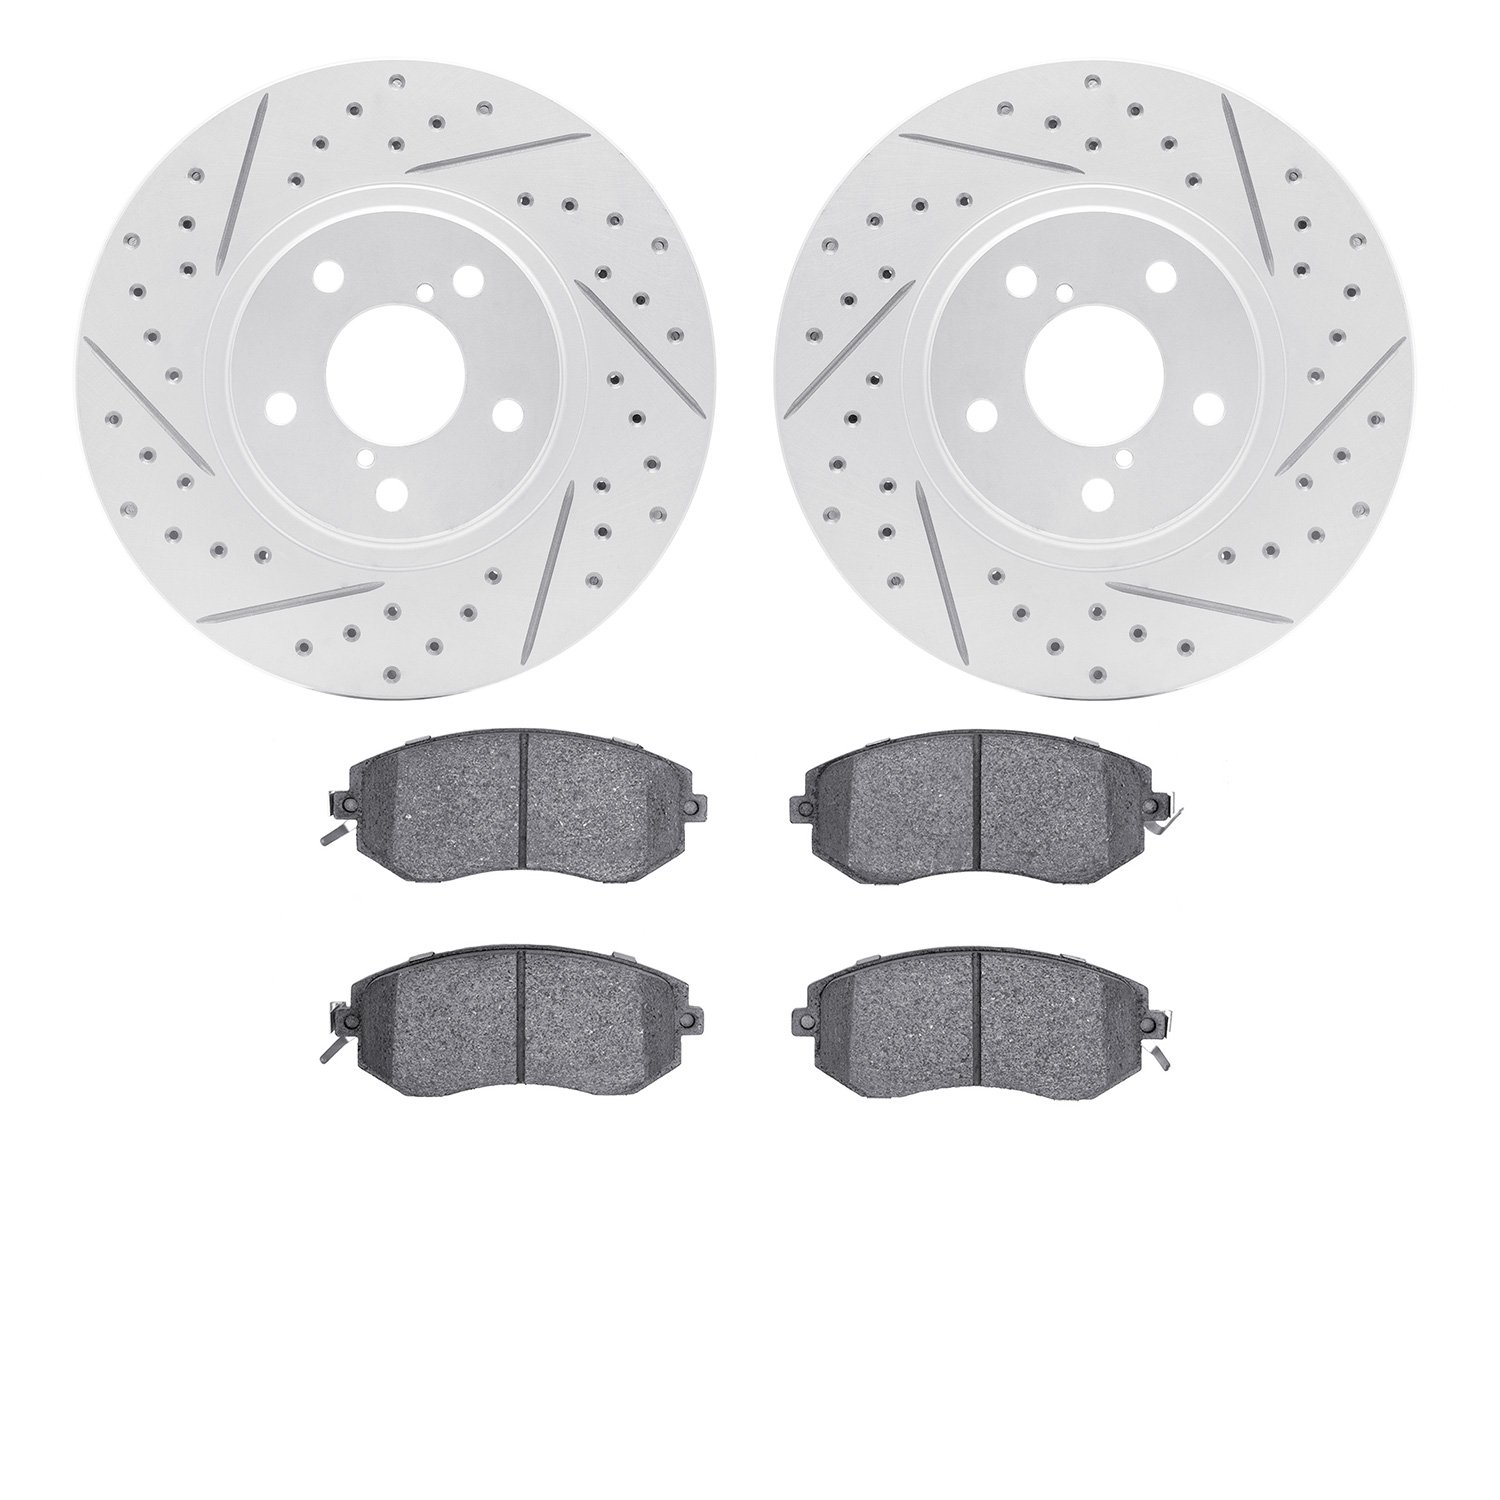 2502-13005 Geoperformance Drilled/Slotted Rotors w/5000 Advanced Brake Pads Kit, 2011-2016 Subaru, Position: Front